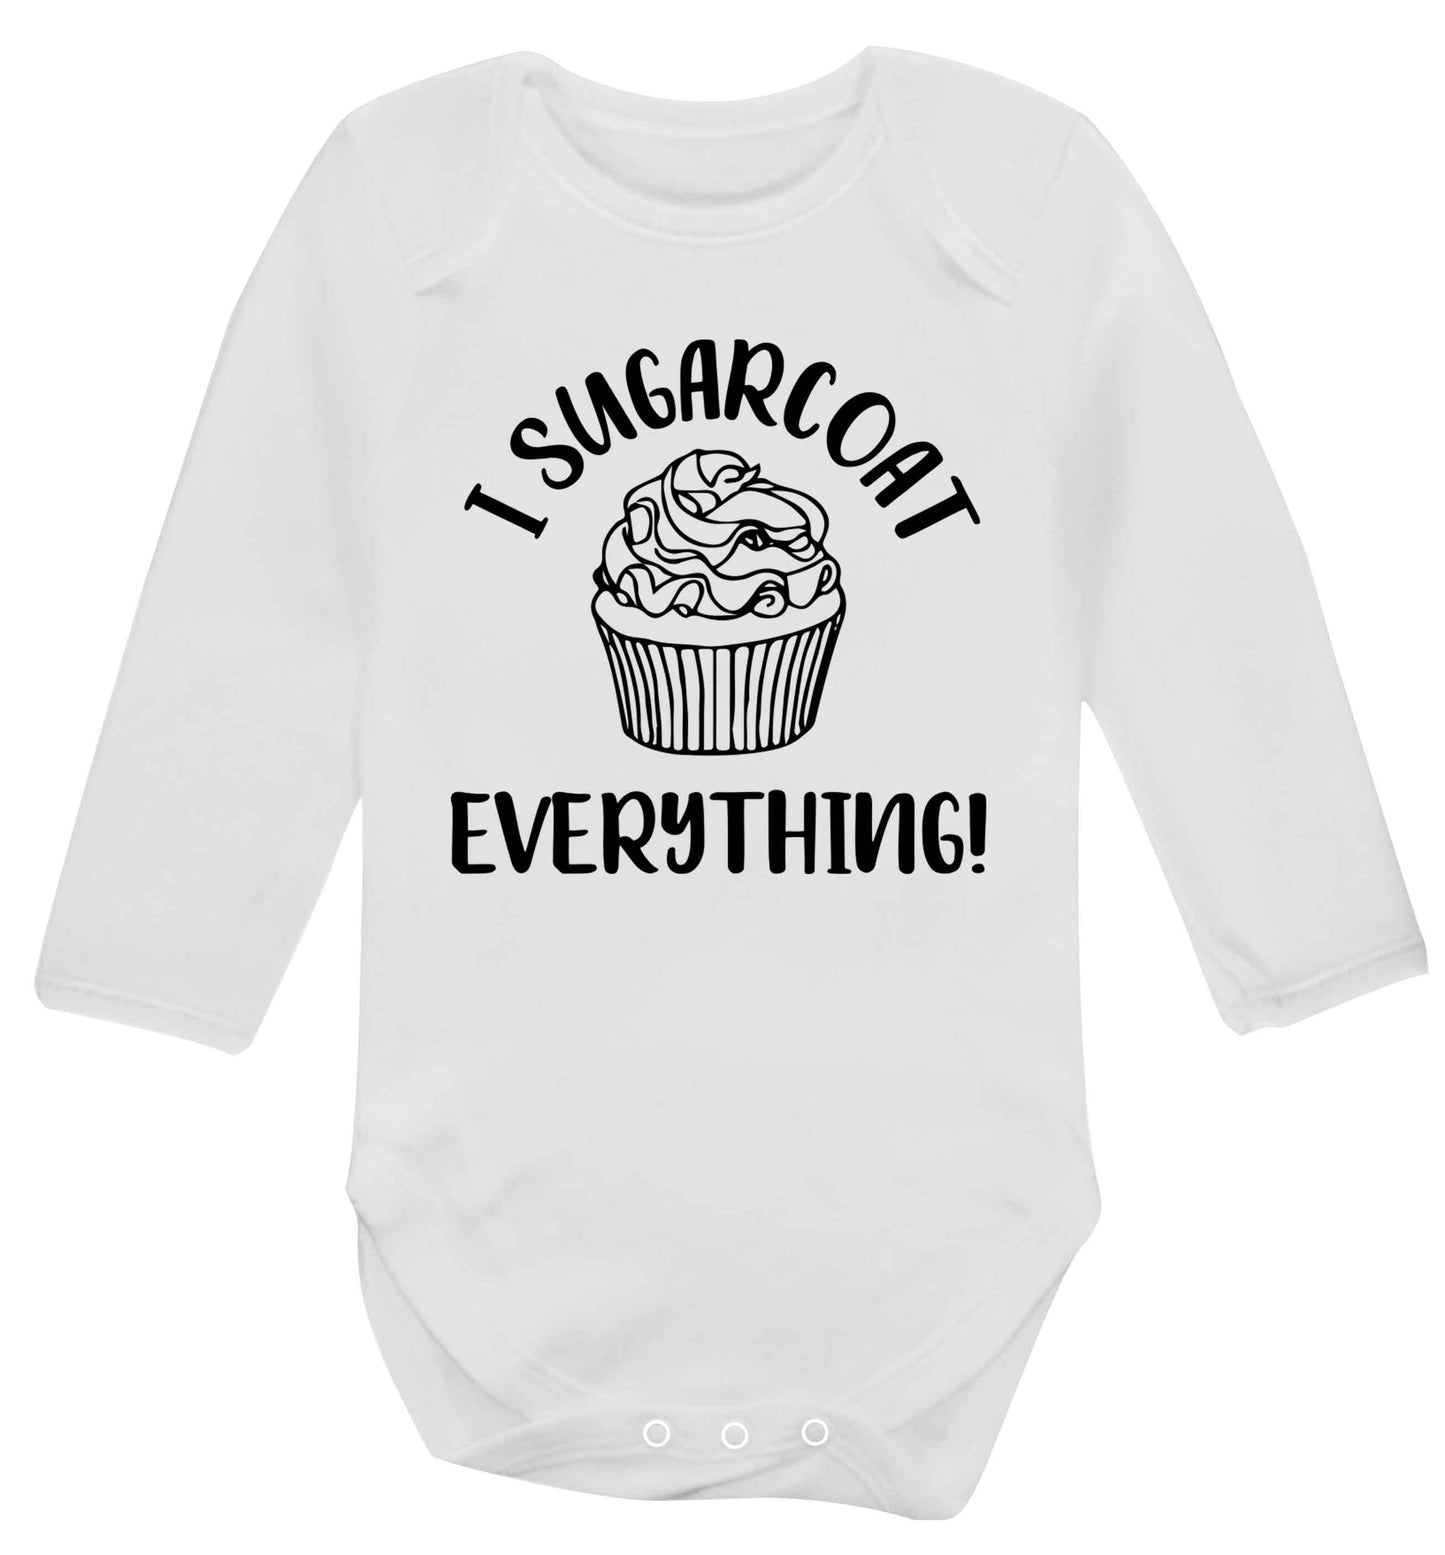 I sugarcoat everything Baby Vest long sleeved white 6-12 months